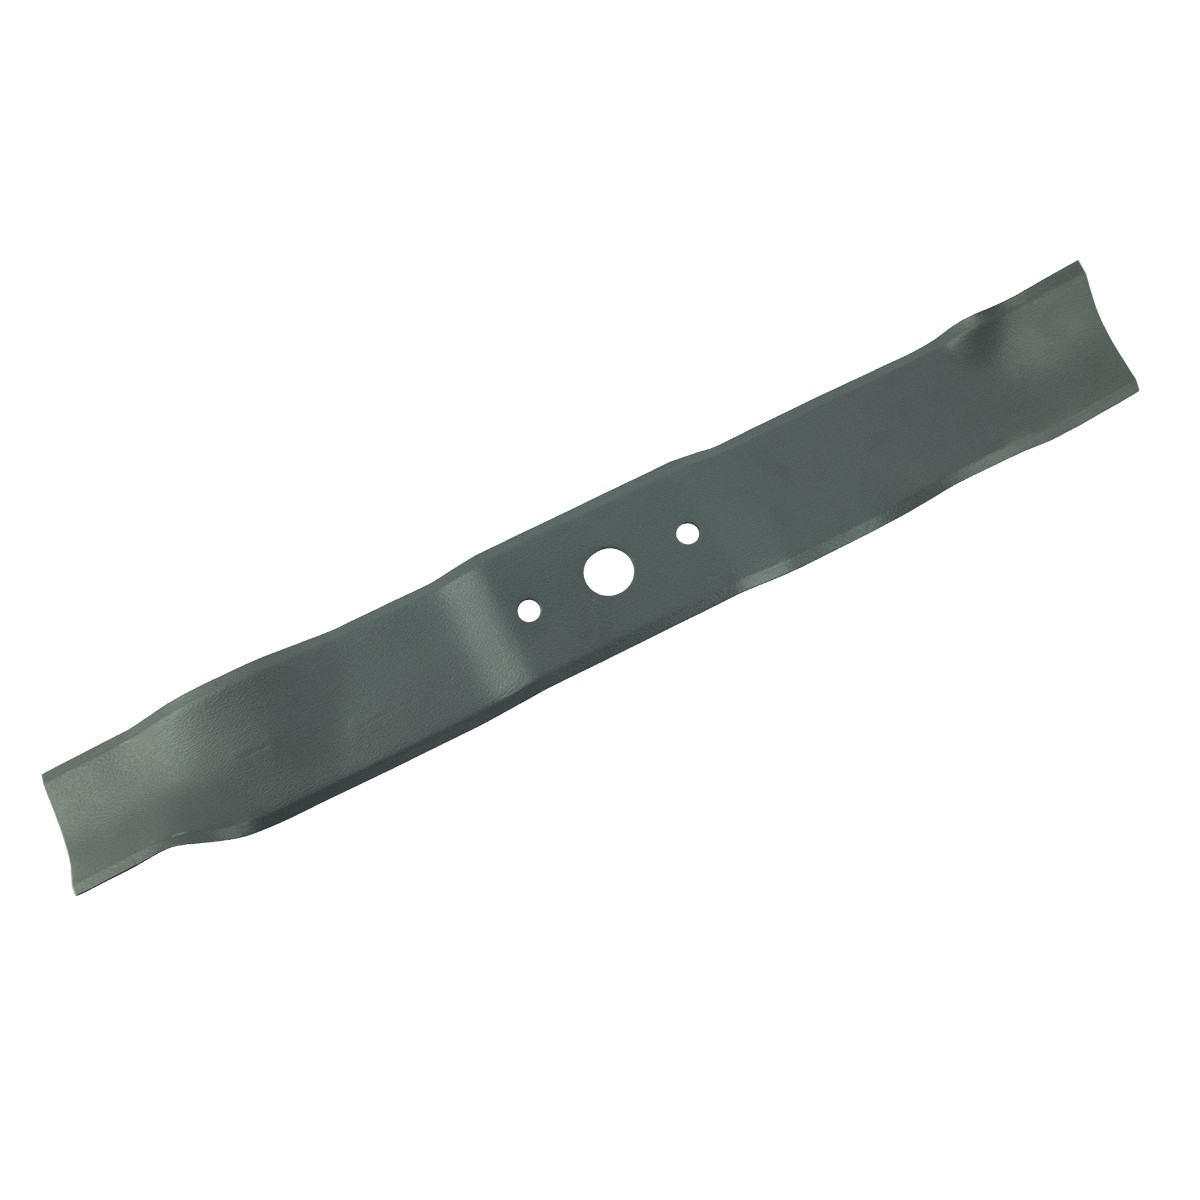 Blade for Stiga Collector 46/440 mm / 181004365/3 mower